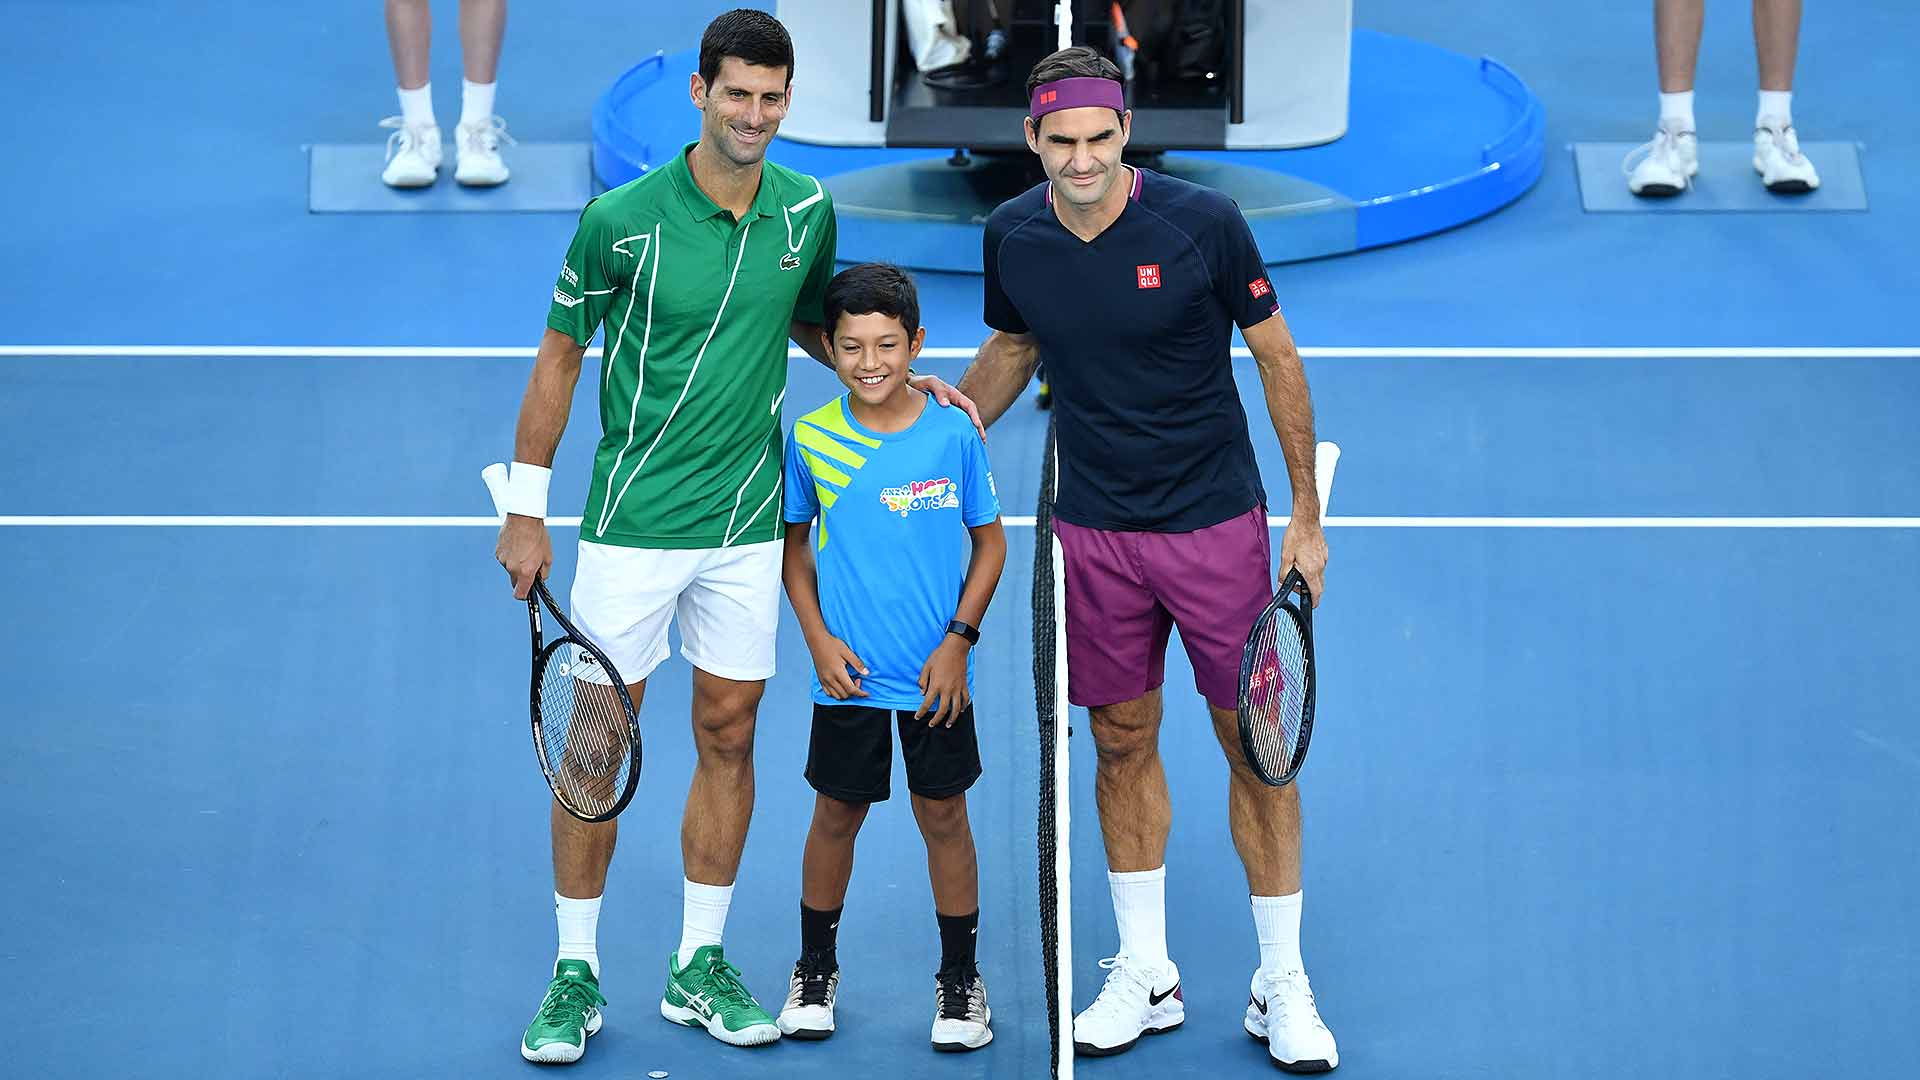 Novak Djokovic and Roger Federer have played 50 times in their prolific ATP Head2Head series.